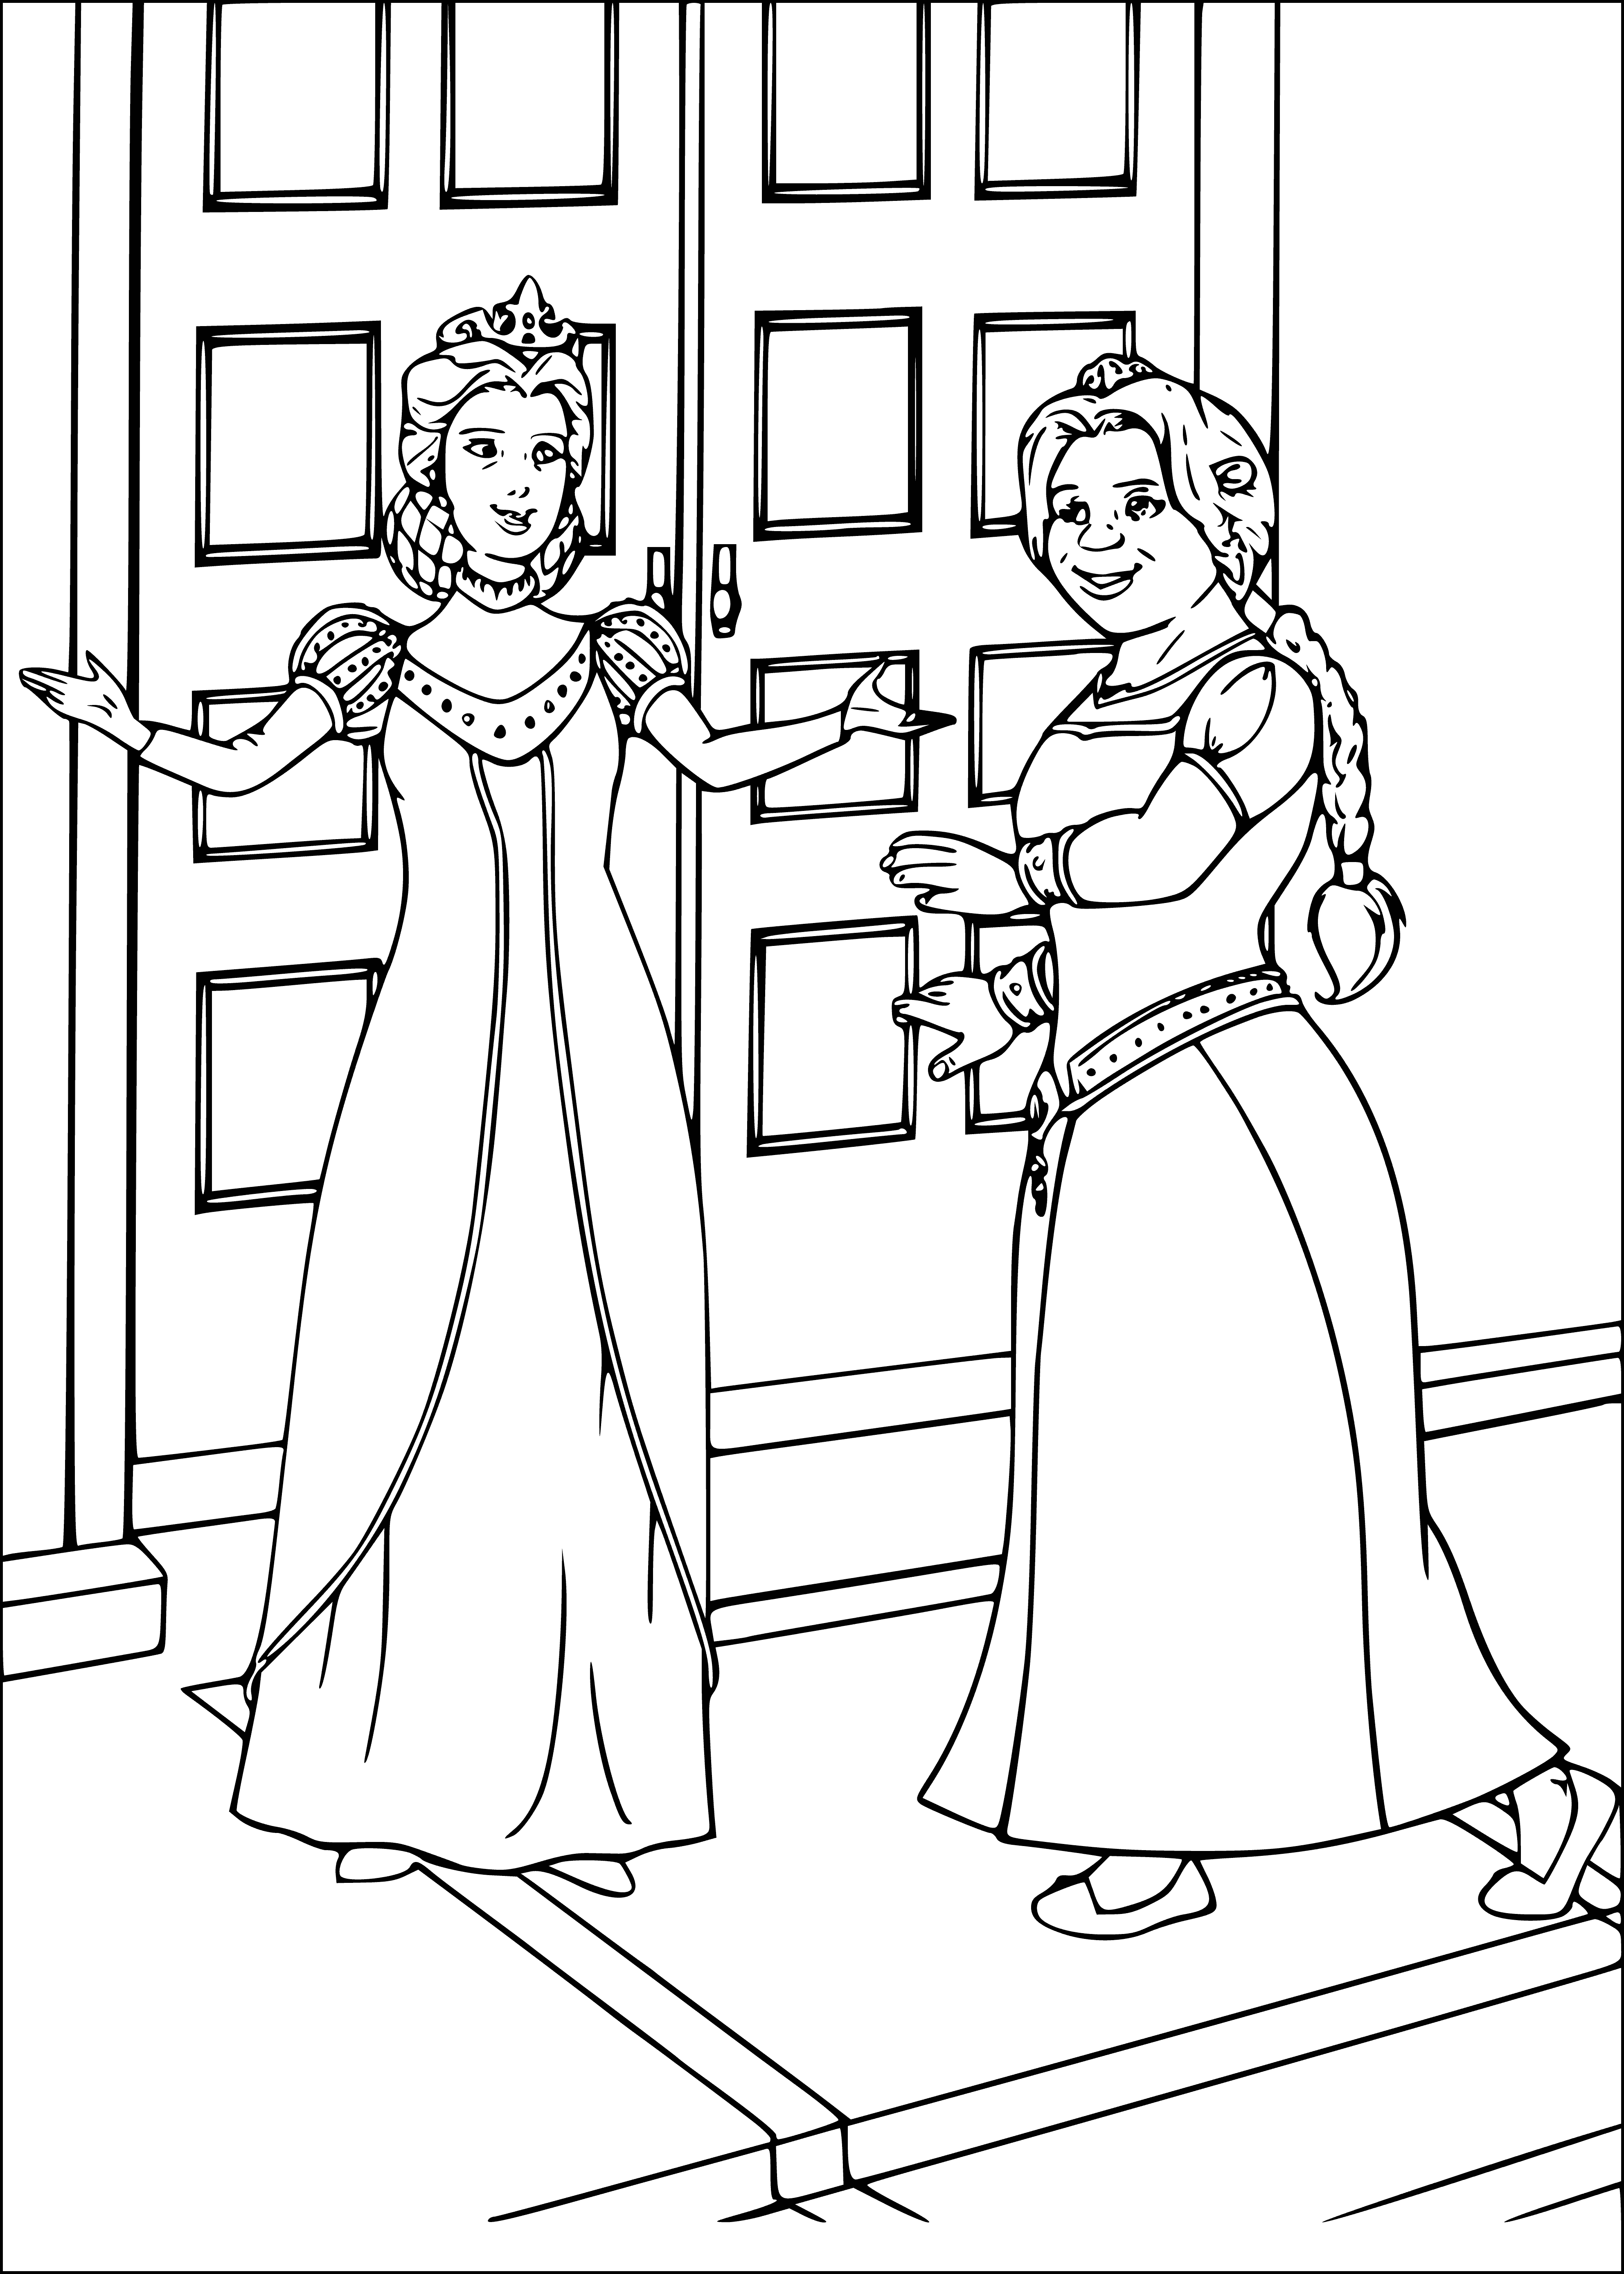 coloring page: Fiona is a kind princess and her mother, the queen, loves her dearly. #happilyeverafter